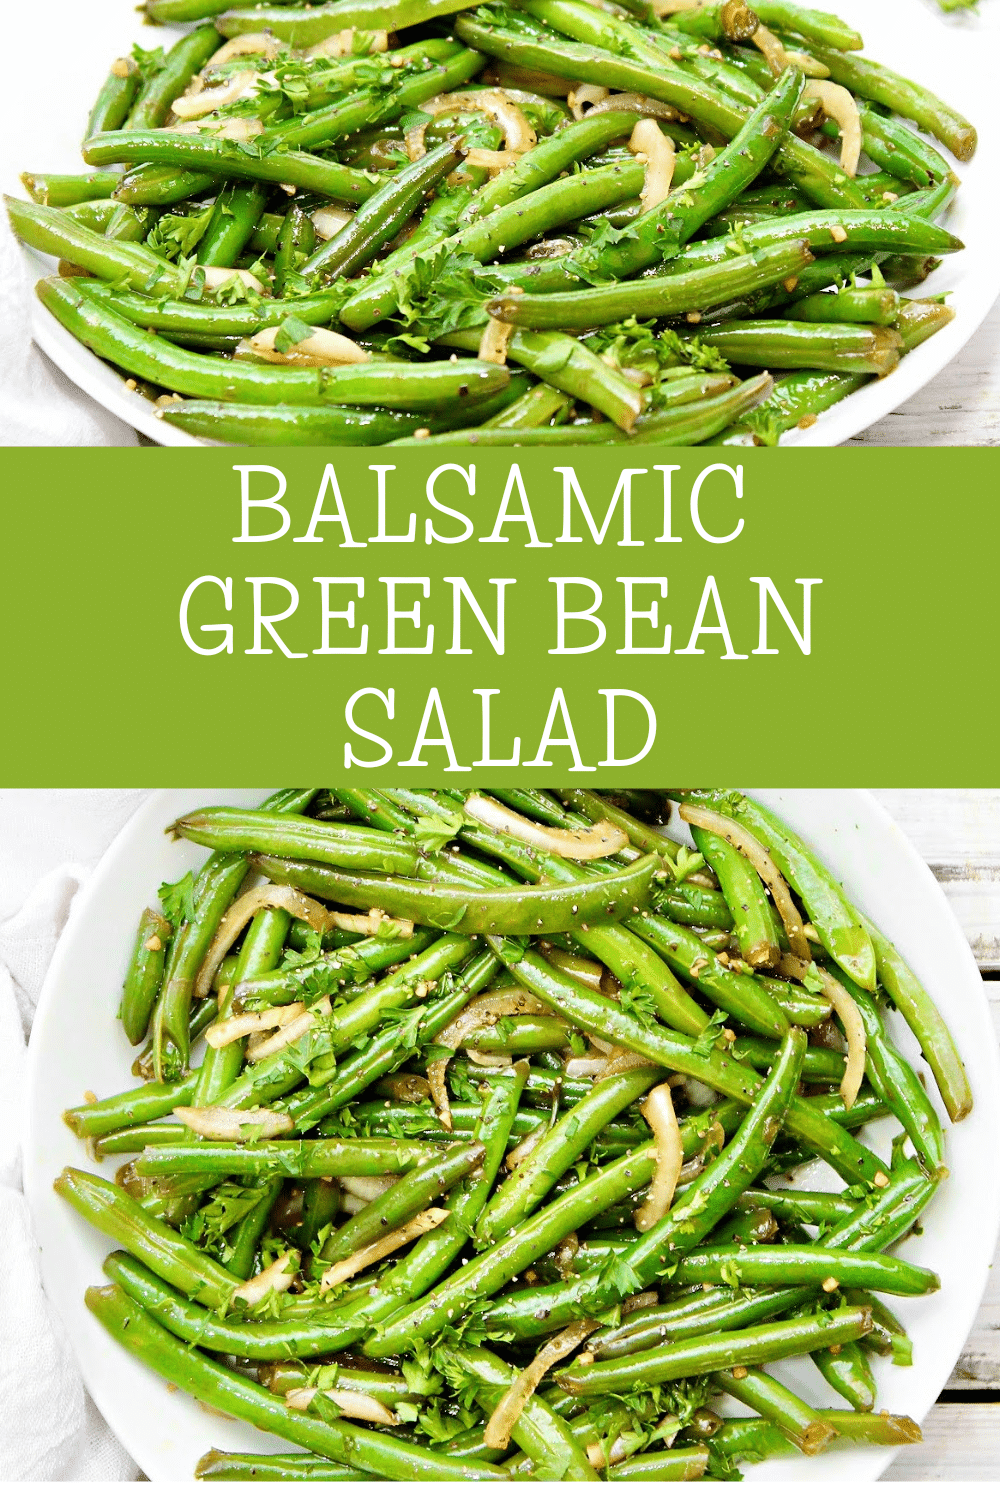 Balsamic Green Bean Salad ~ Crisp-tender green beans marinated in a simple balsamic dressing with fresh onion, garlic, and parsley. via @thiswifecooks